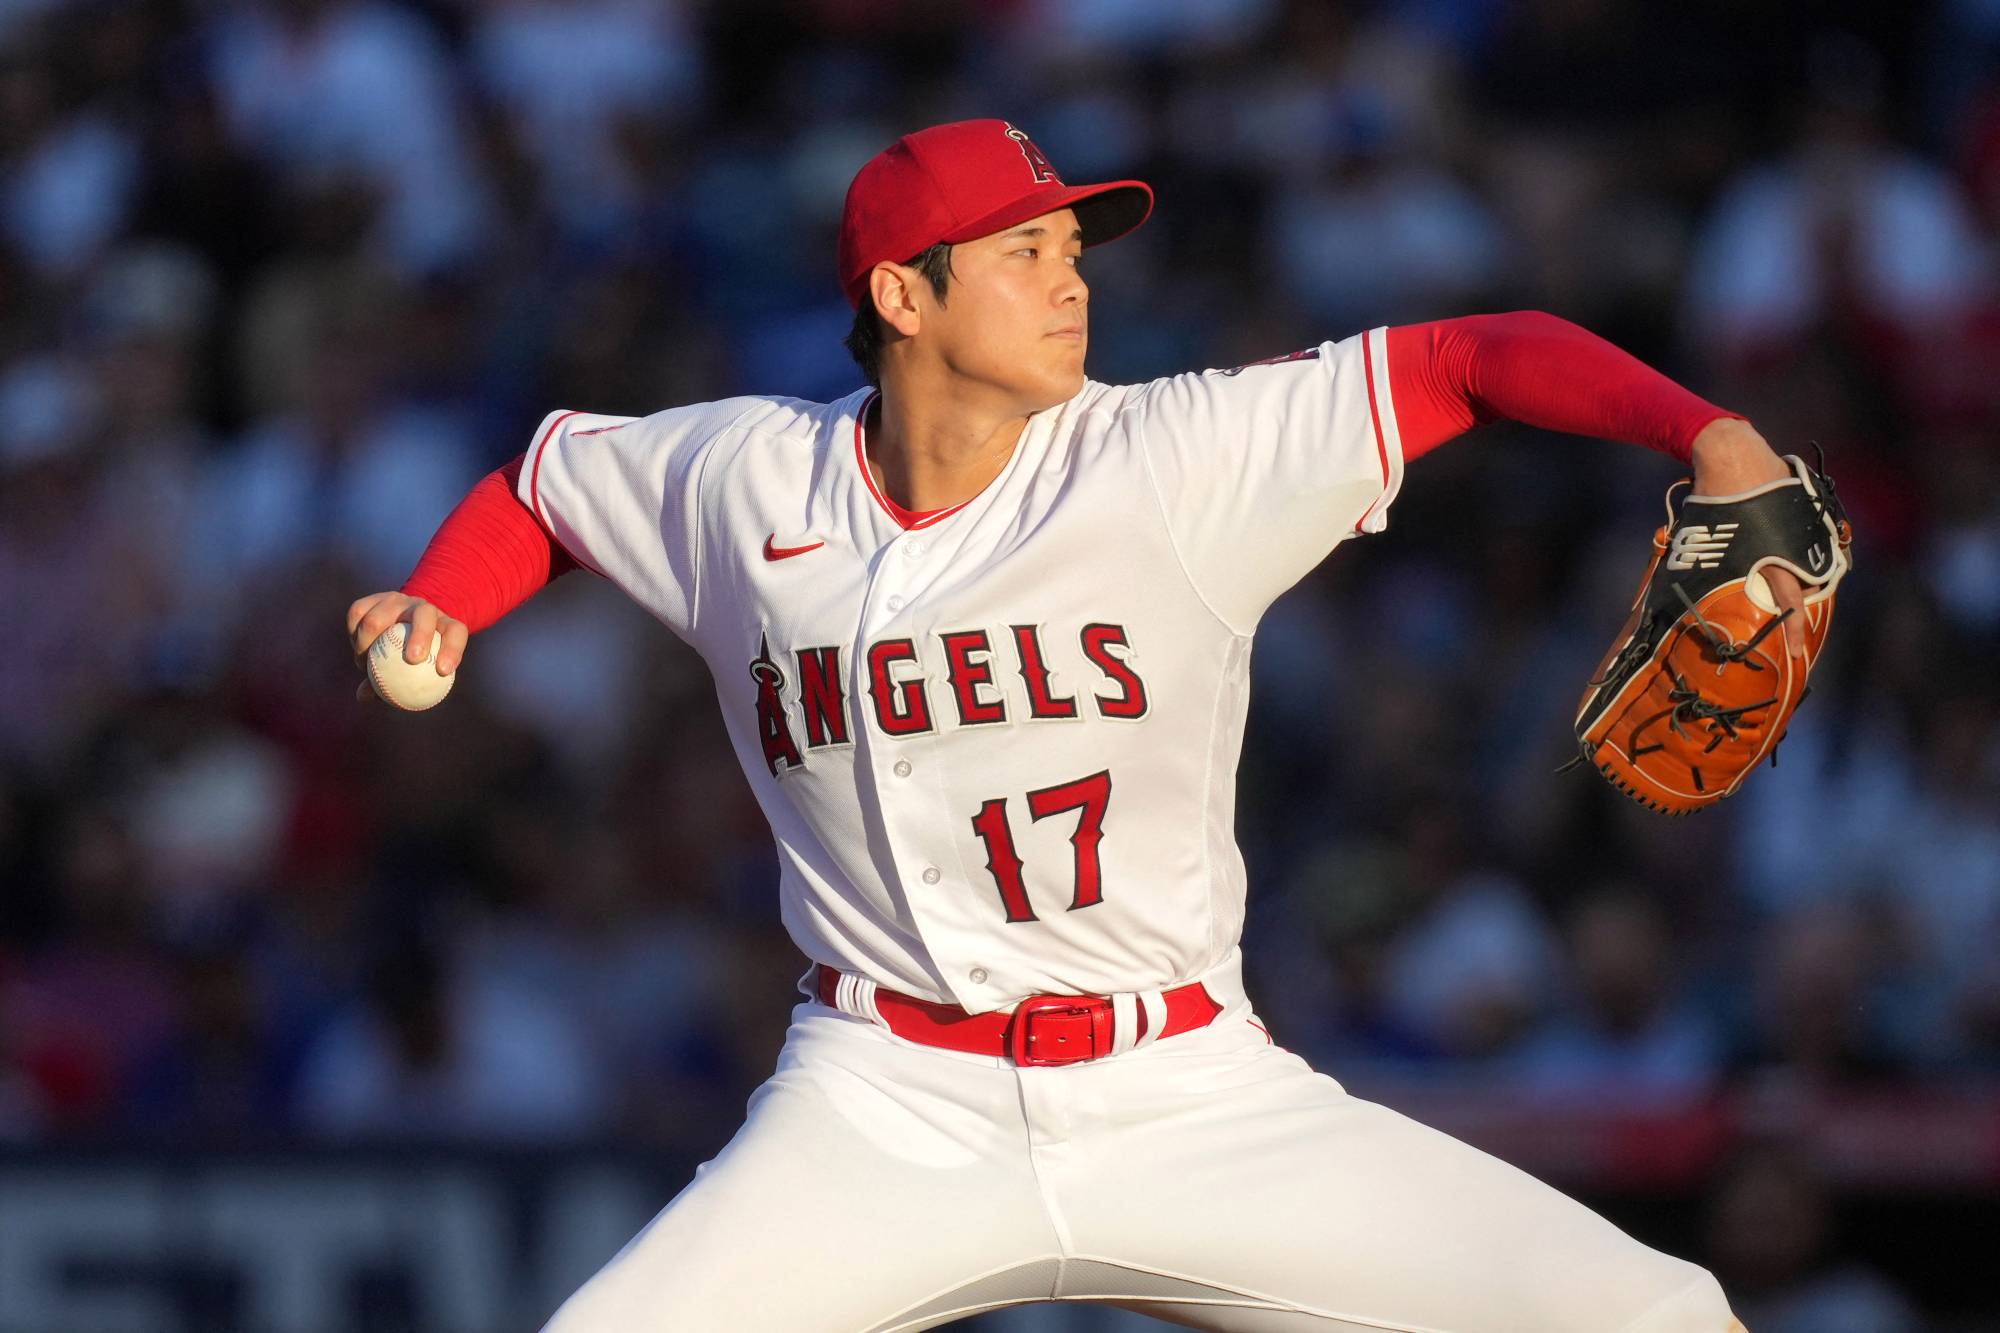 Shohei Ohtani strikes out 12 in loss as Angels lose close game against  Dodgers - The Japan Times